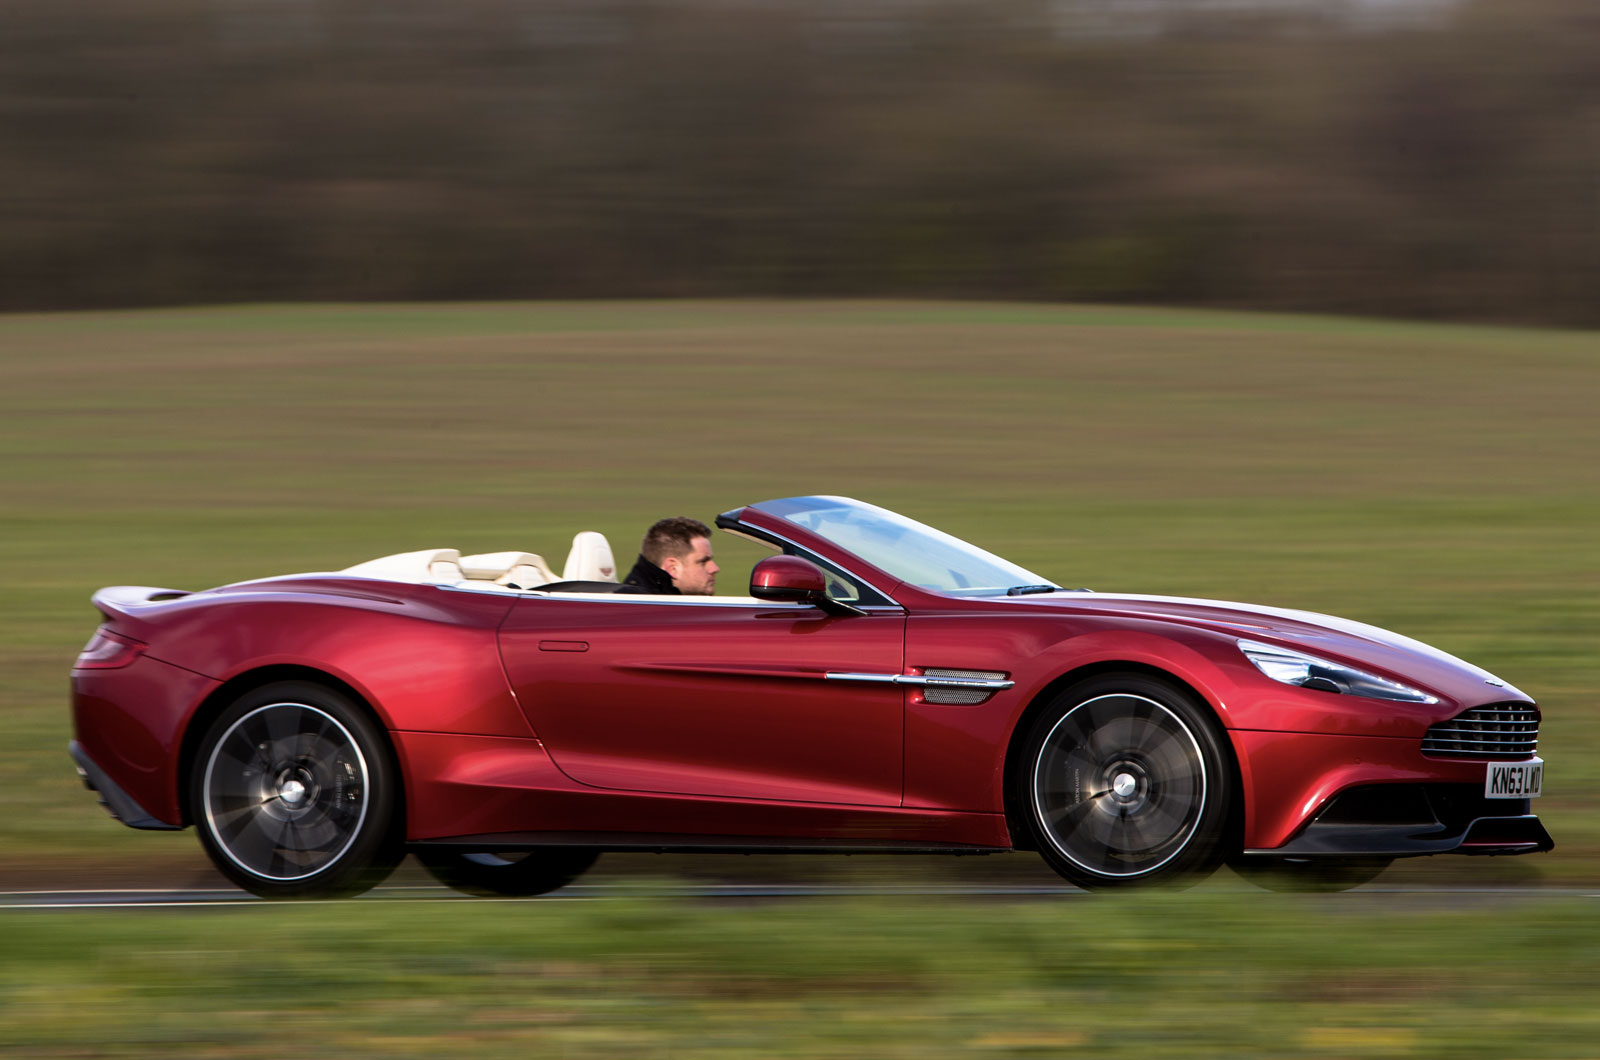 The Majesty Of The Open Air: The Aston Martin Vanquish Volante